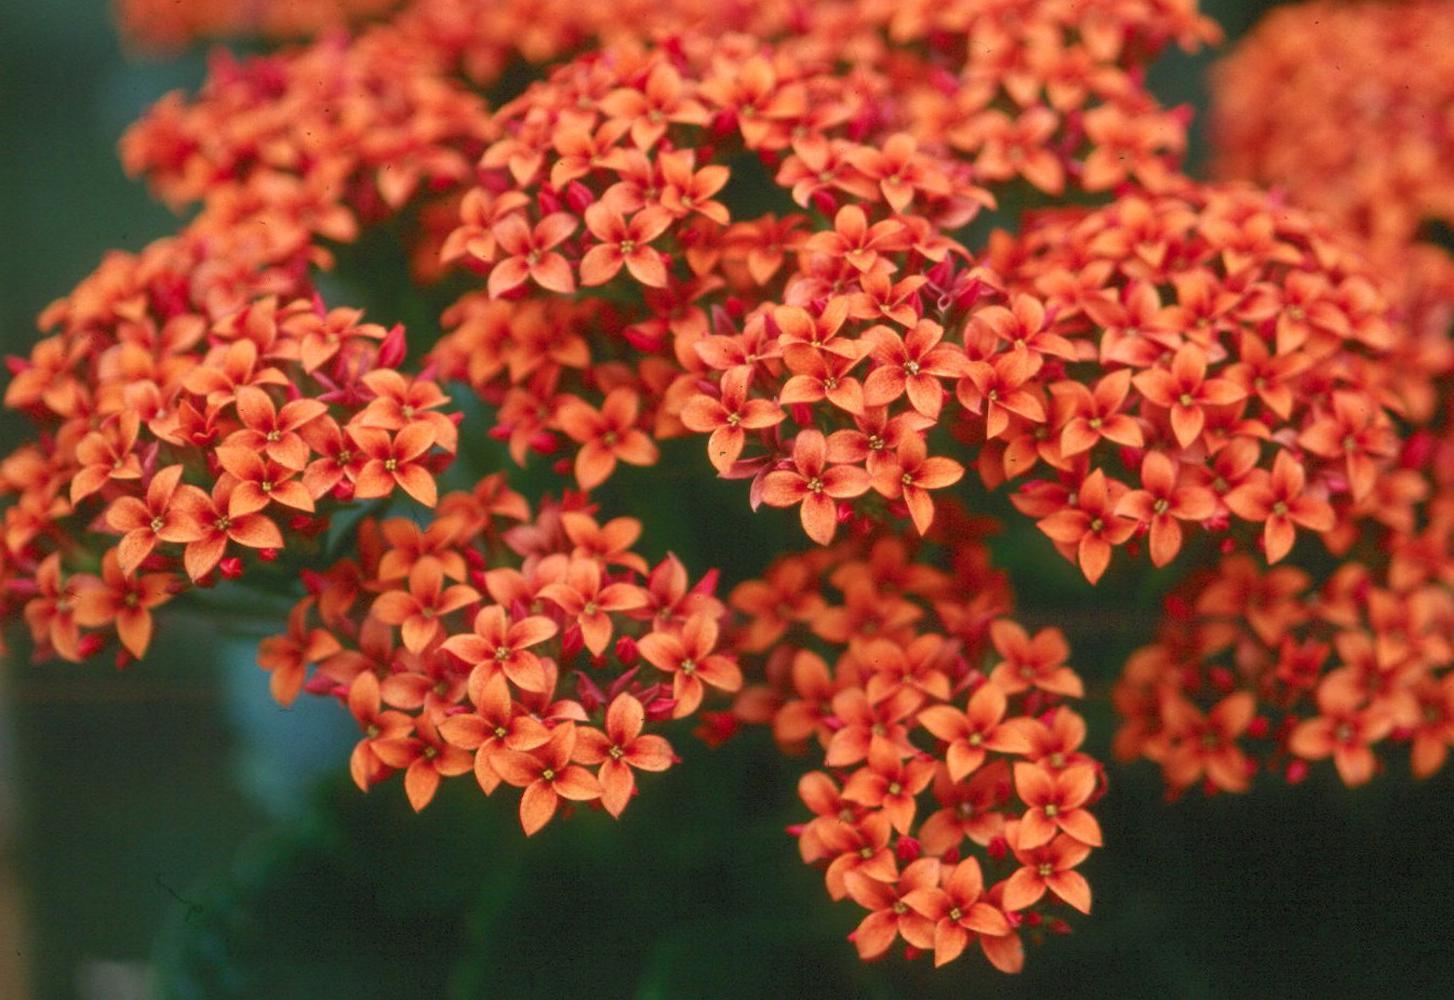 Kalanchoe is a member of the family known as Crassulaceae.